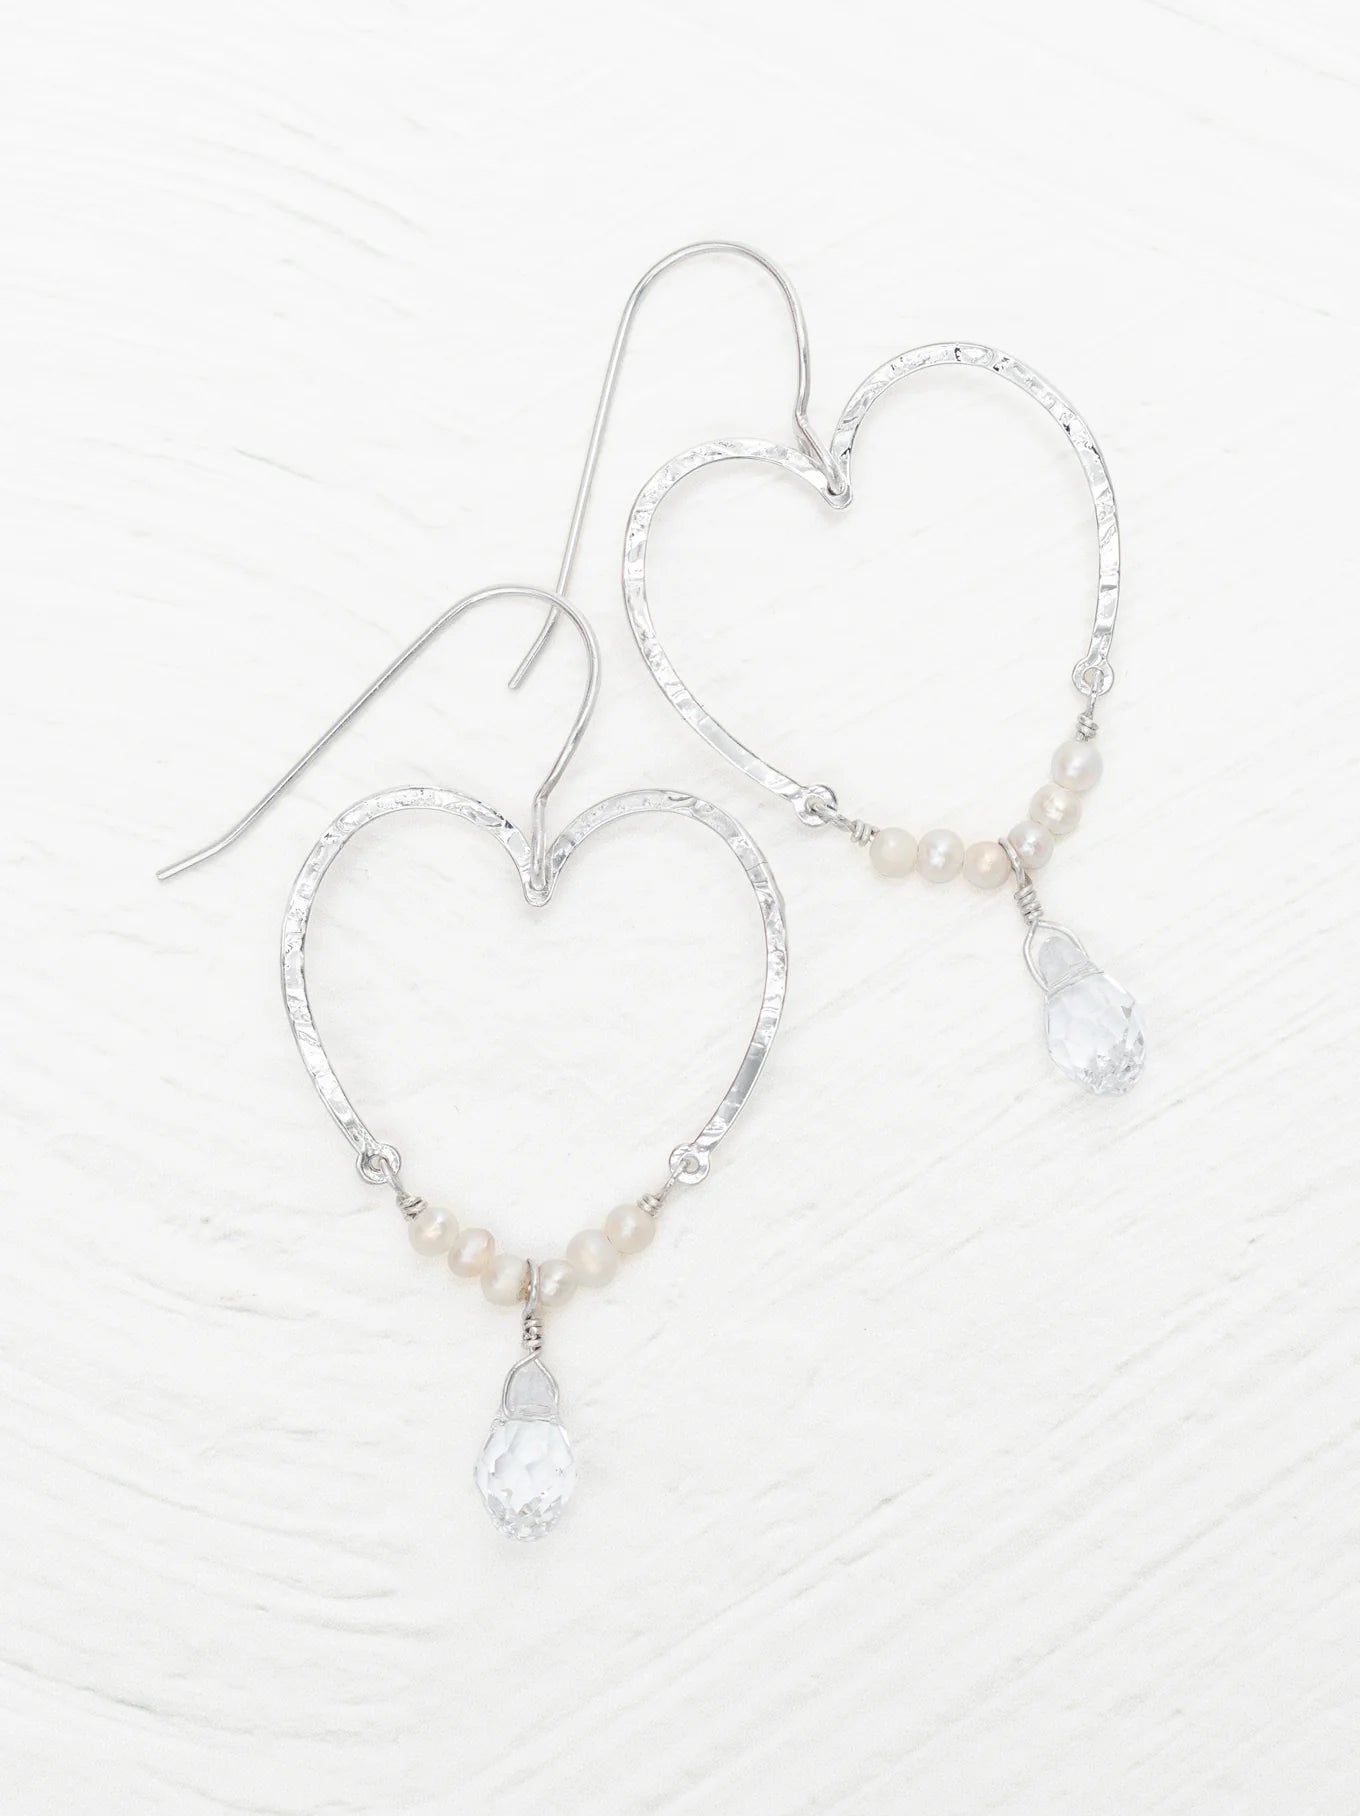 heart earring with pearls and gemstone